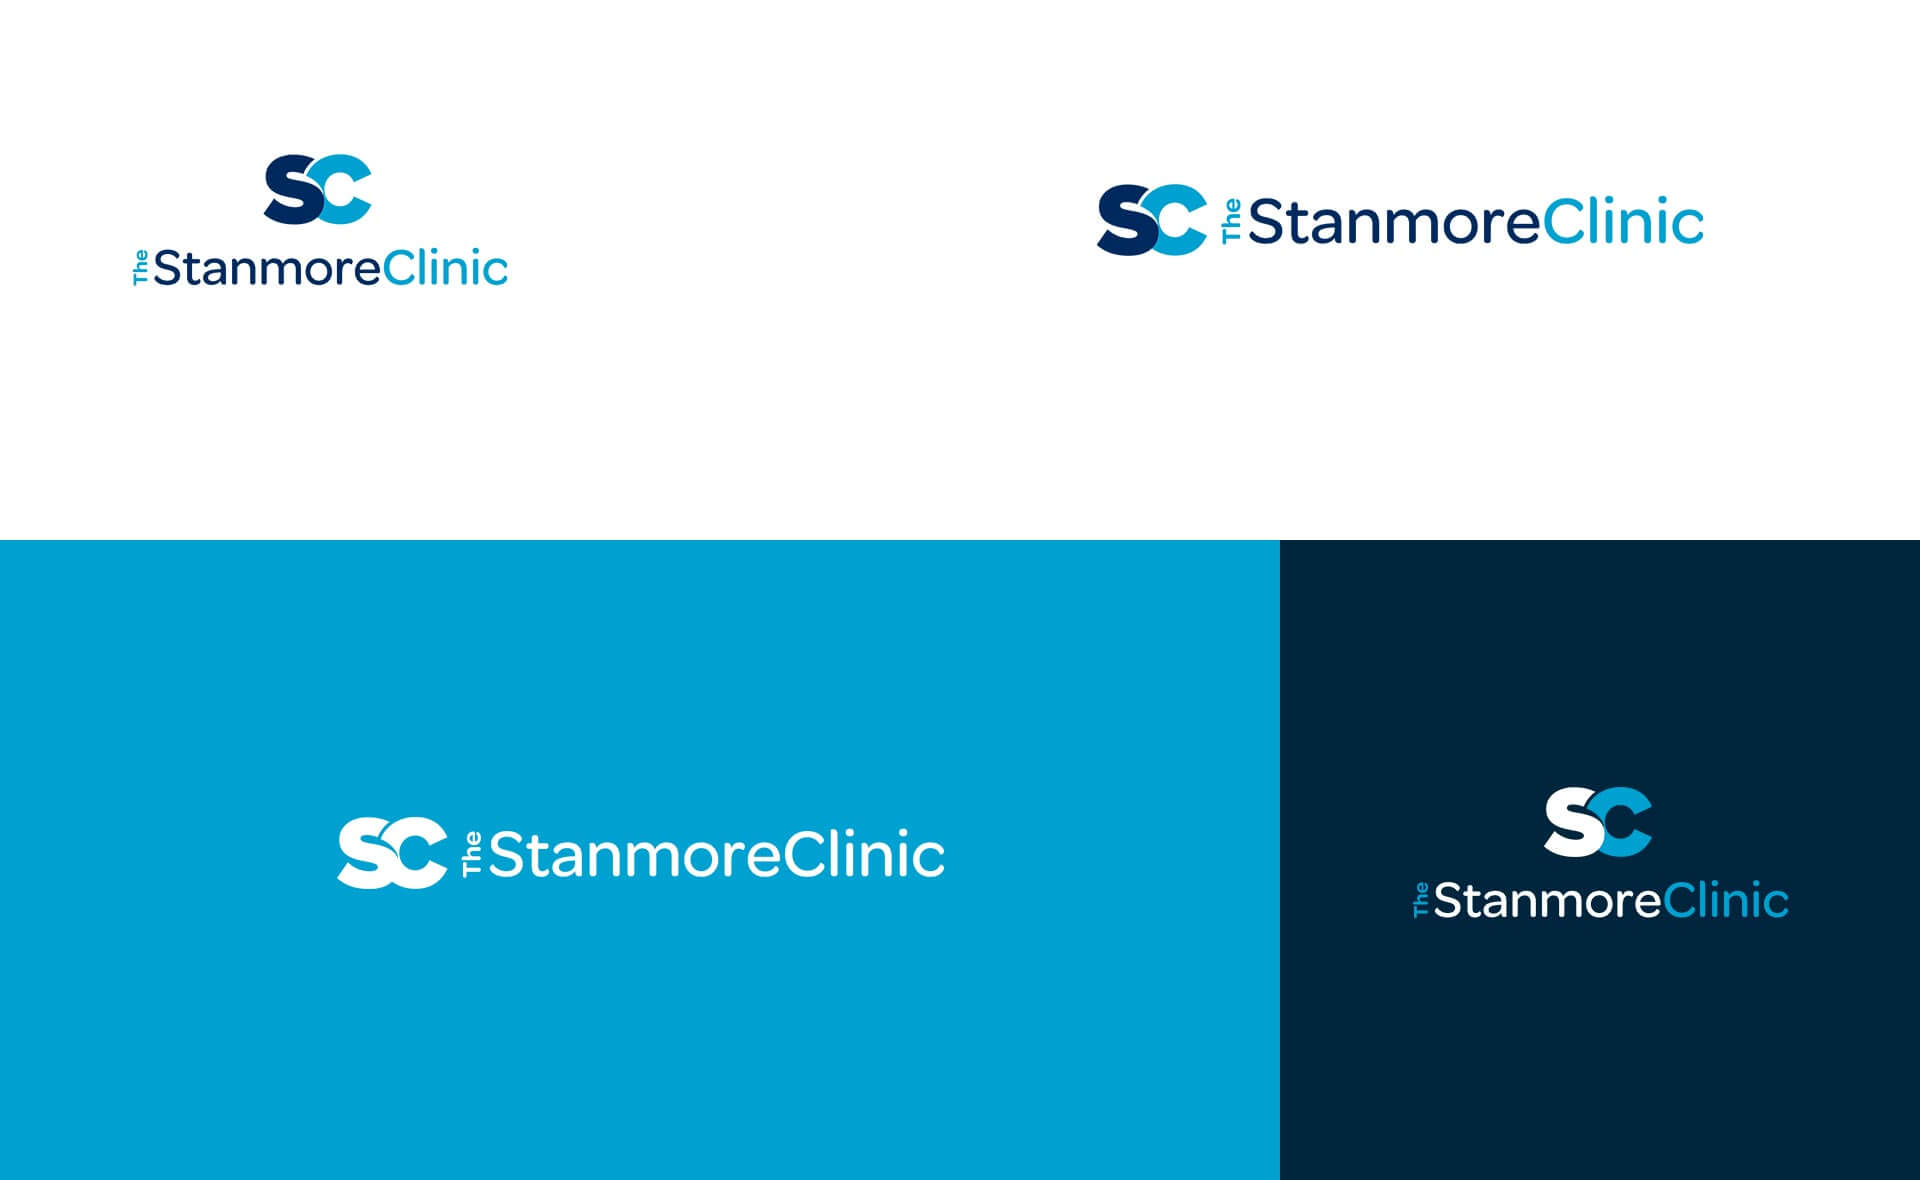 Stanmore Clinic image